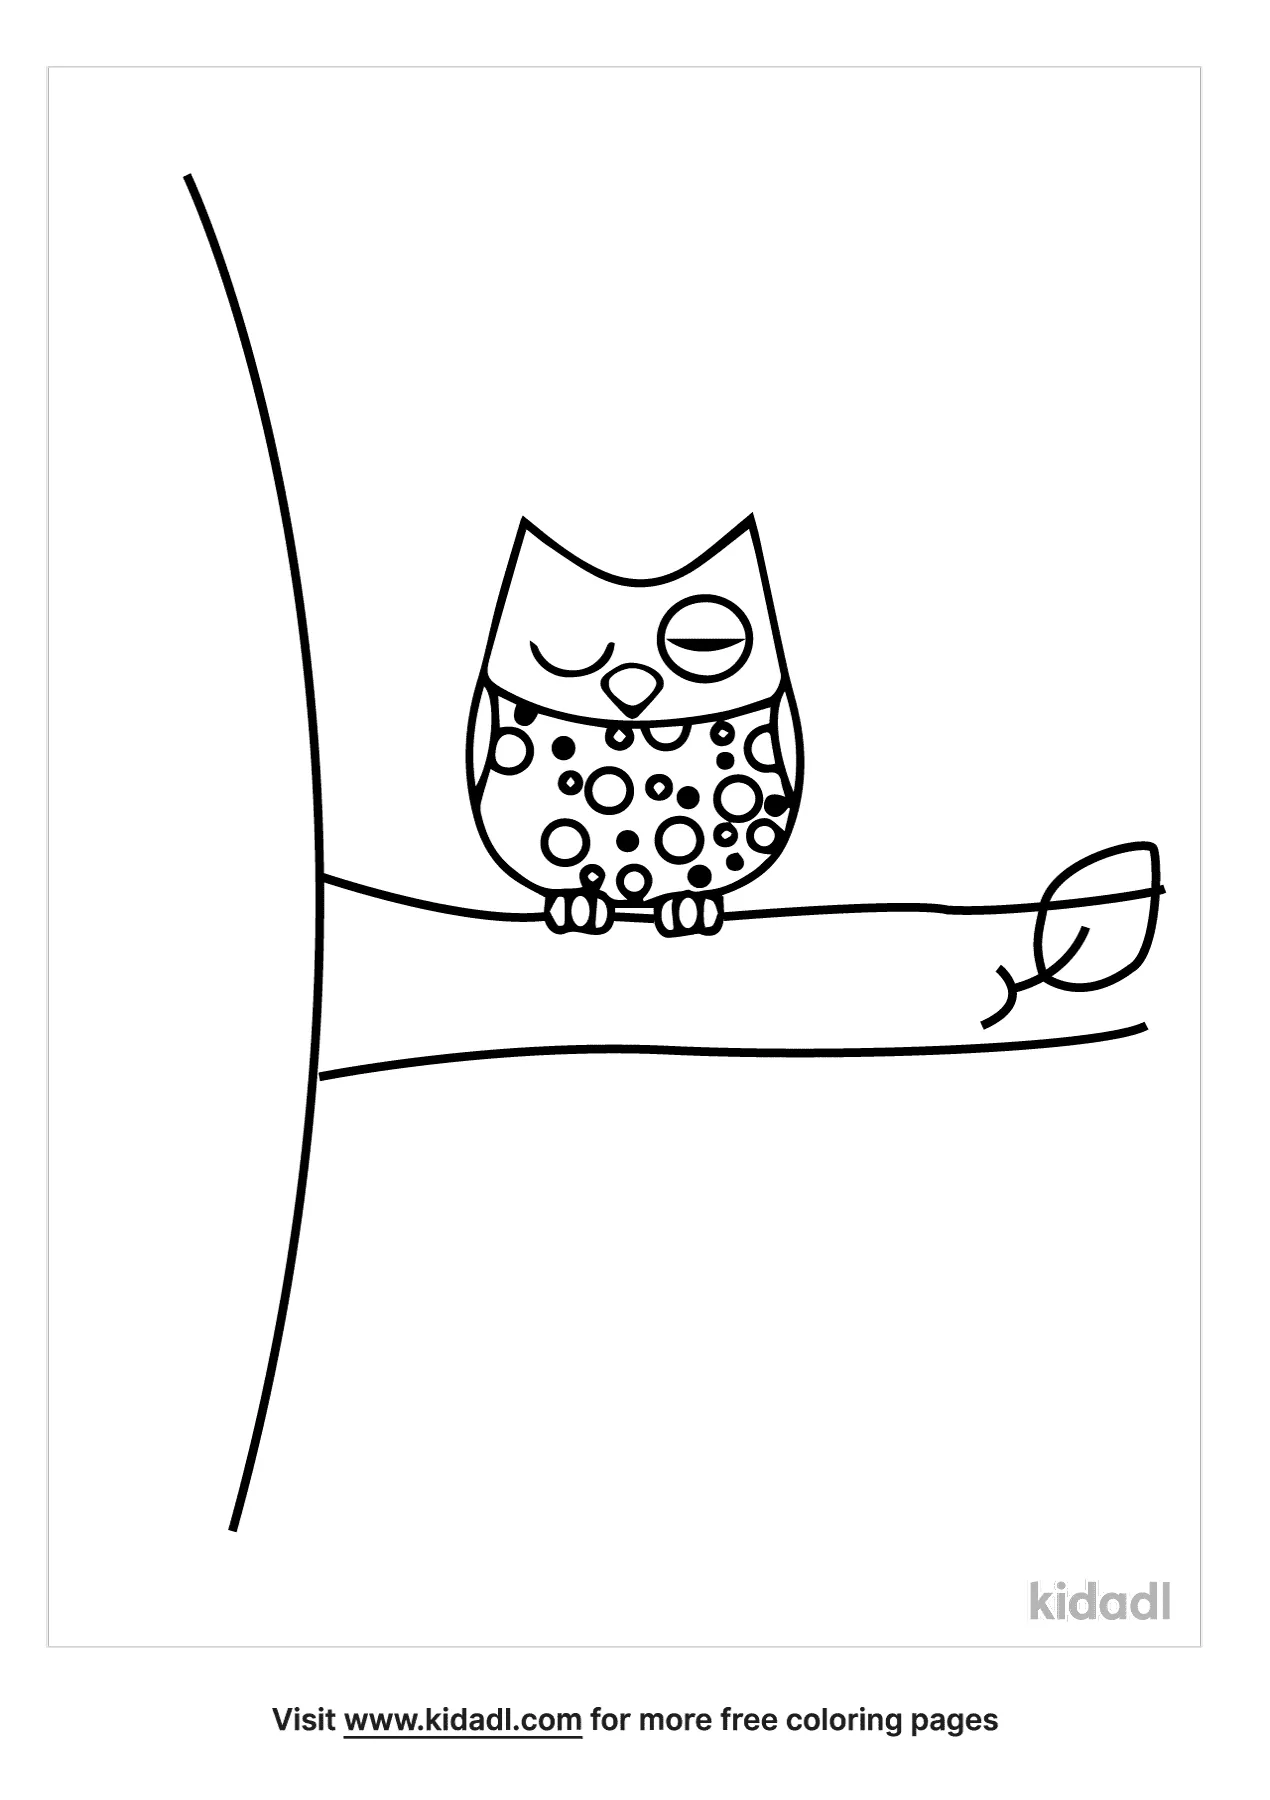 Free Nocturnal Animals Coloring Page | Coloring Page Printables | Kidadl